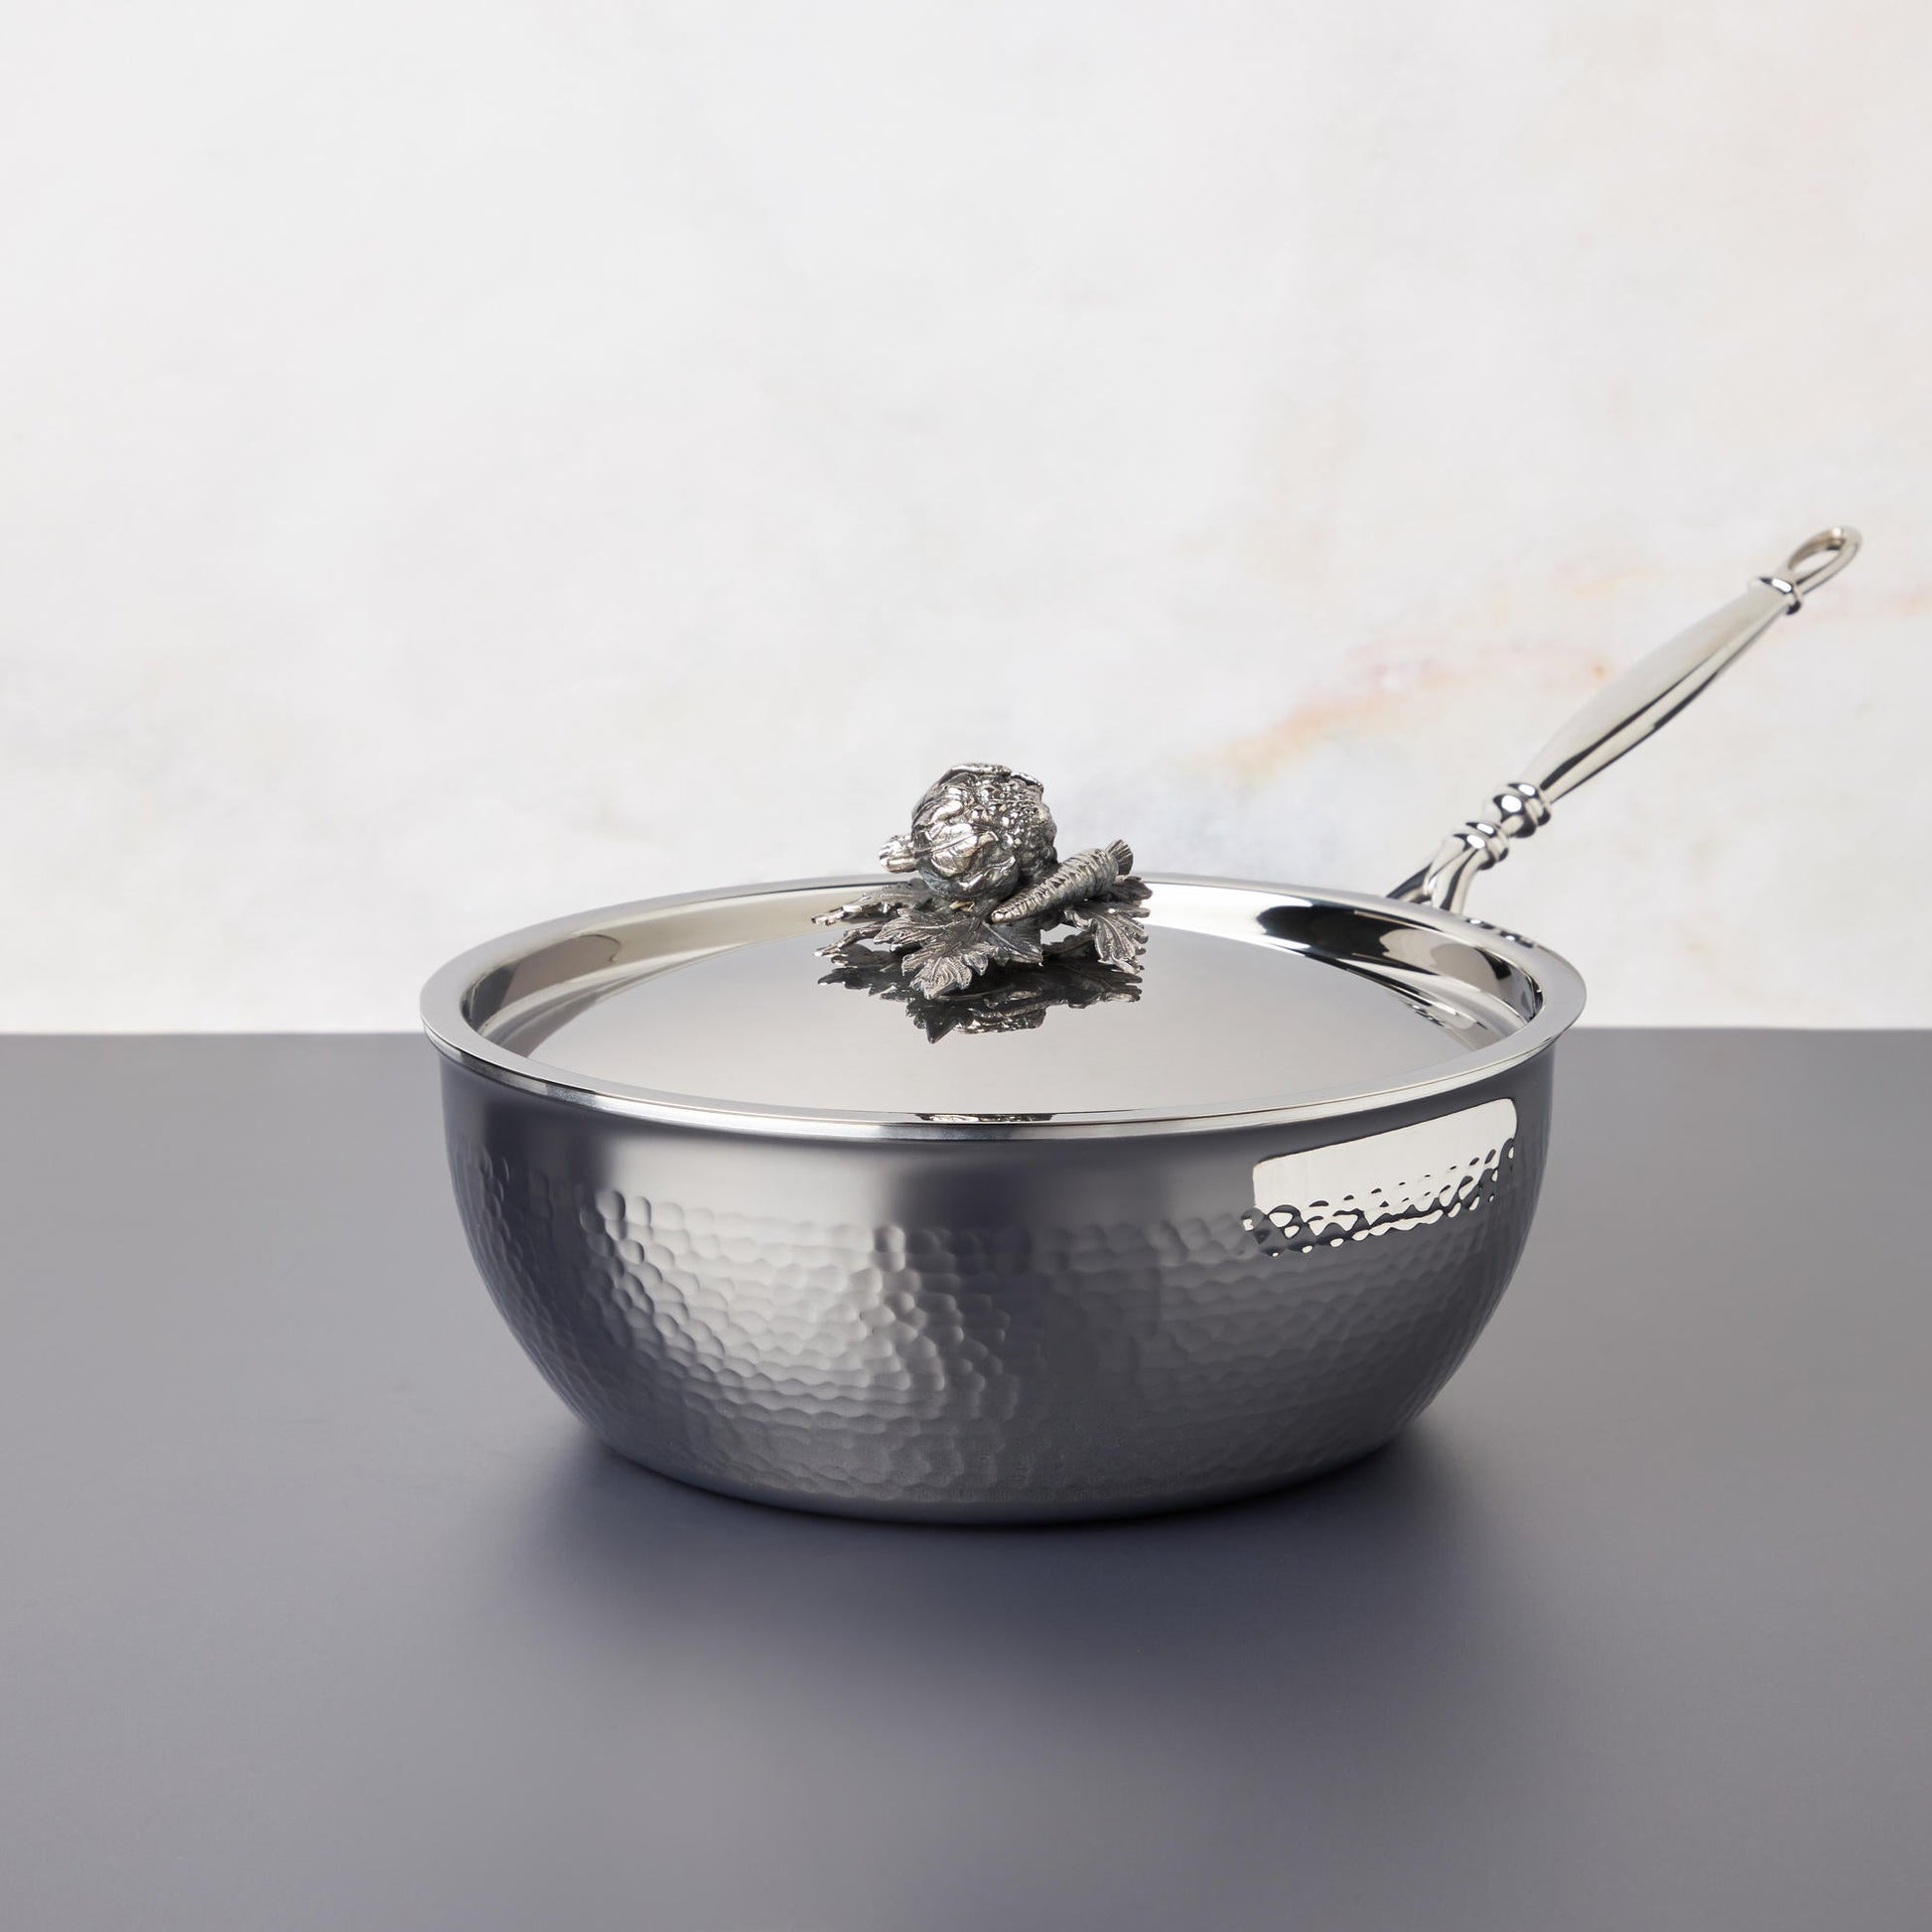  Opus Prima hammered clad stainless steel chefs pan with decorated silver-plated lid knob finial from Ruffoni